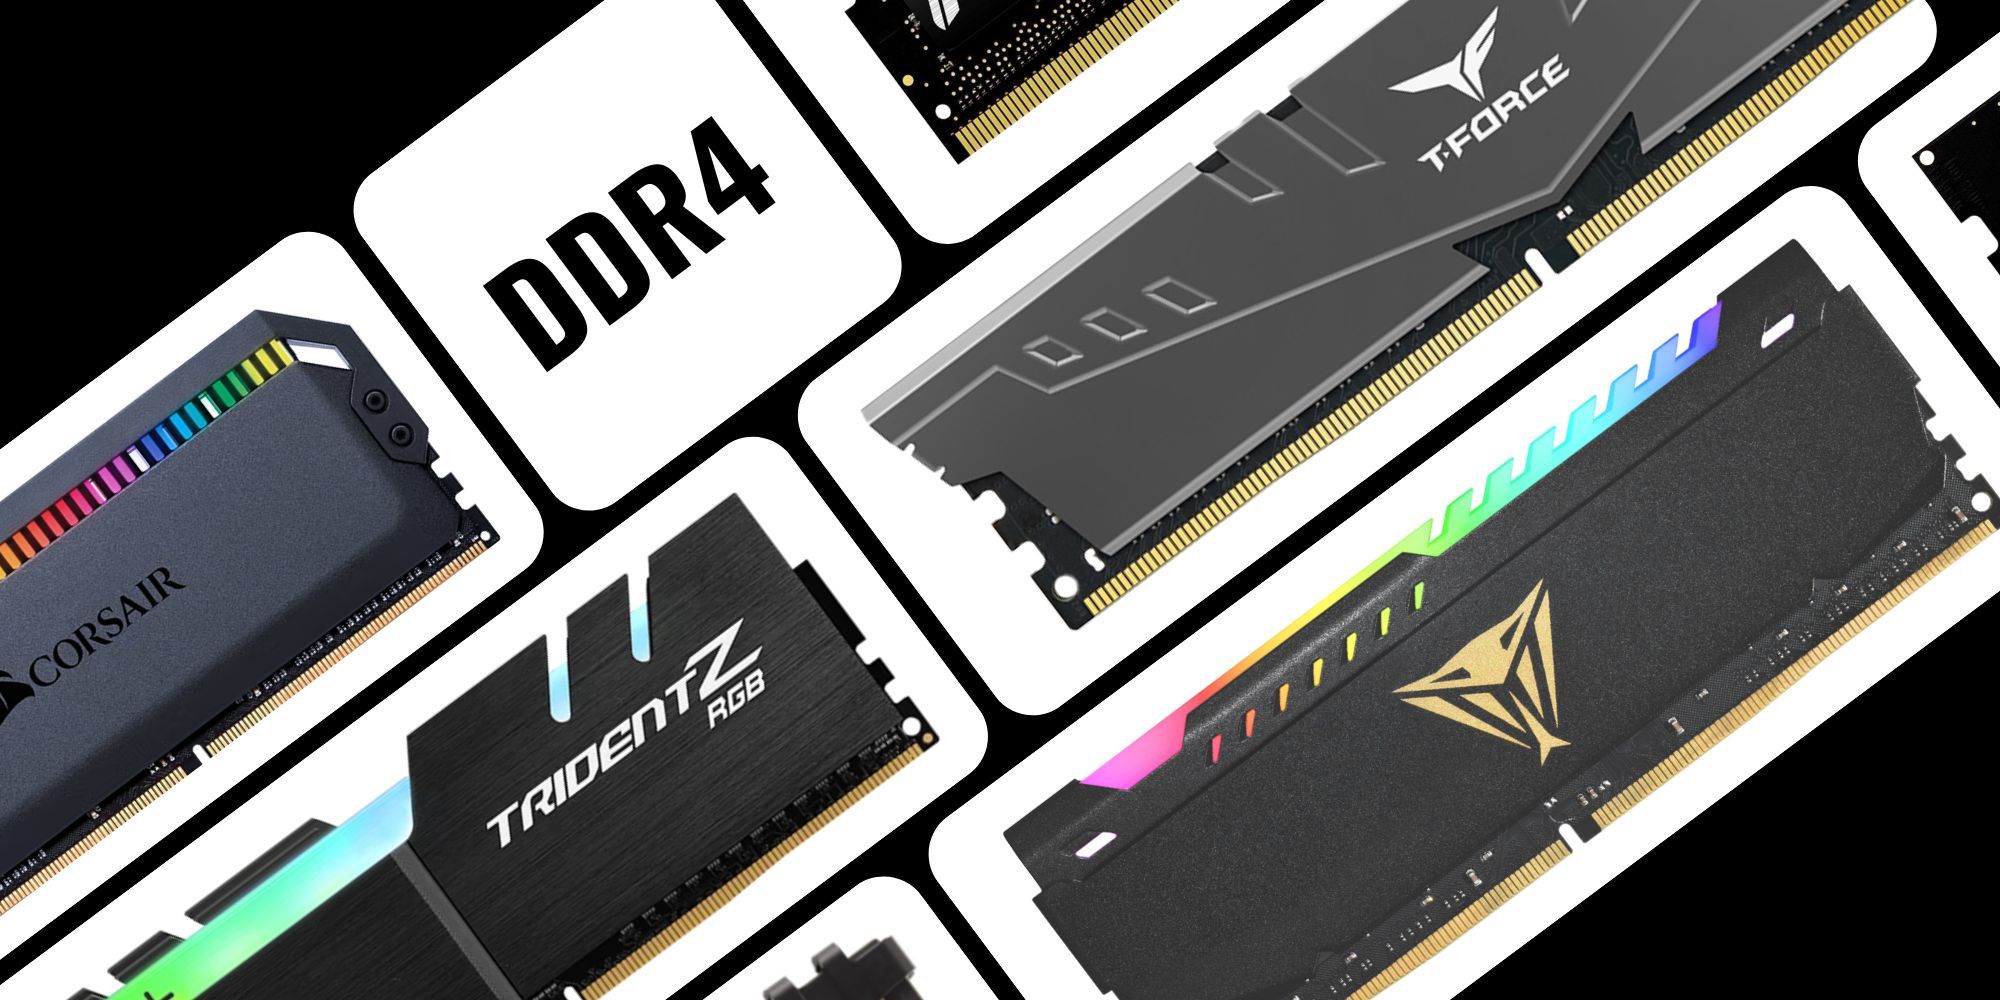 Photo collage of DDR4 RAMs including CORSAIR Dominator Platinum RGB, Patriot Memory Viper Steel RGB, TEAMGROUP T-Force Vulcan Z and others. 